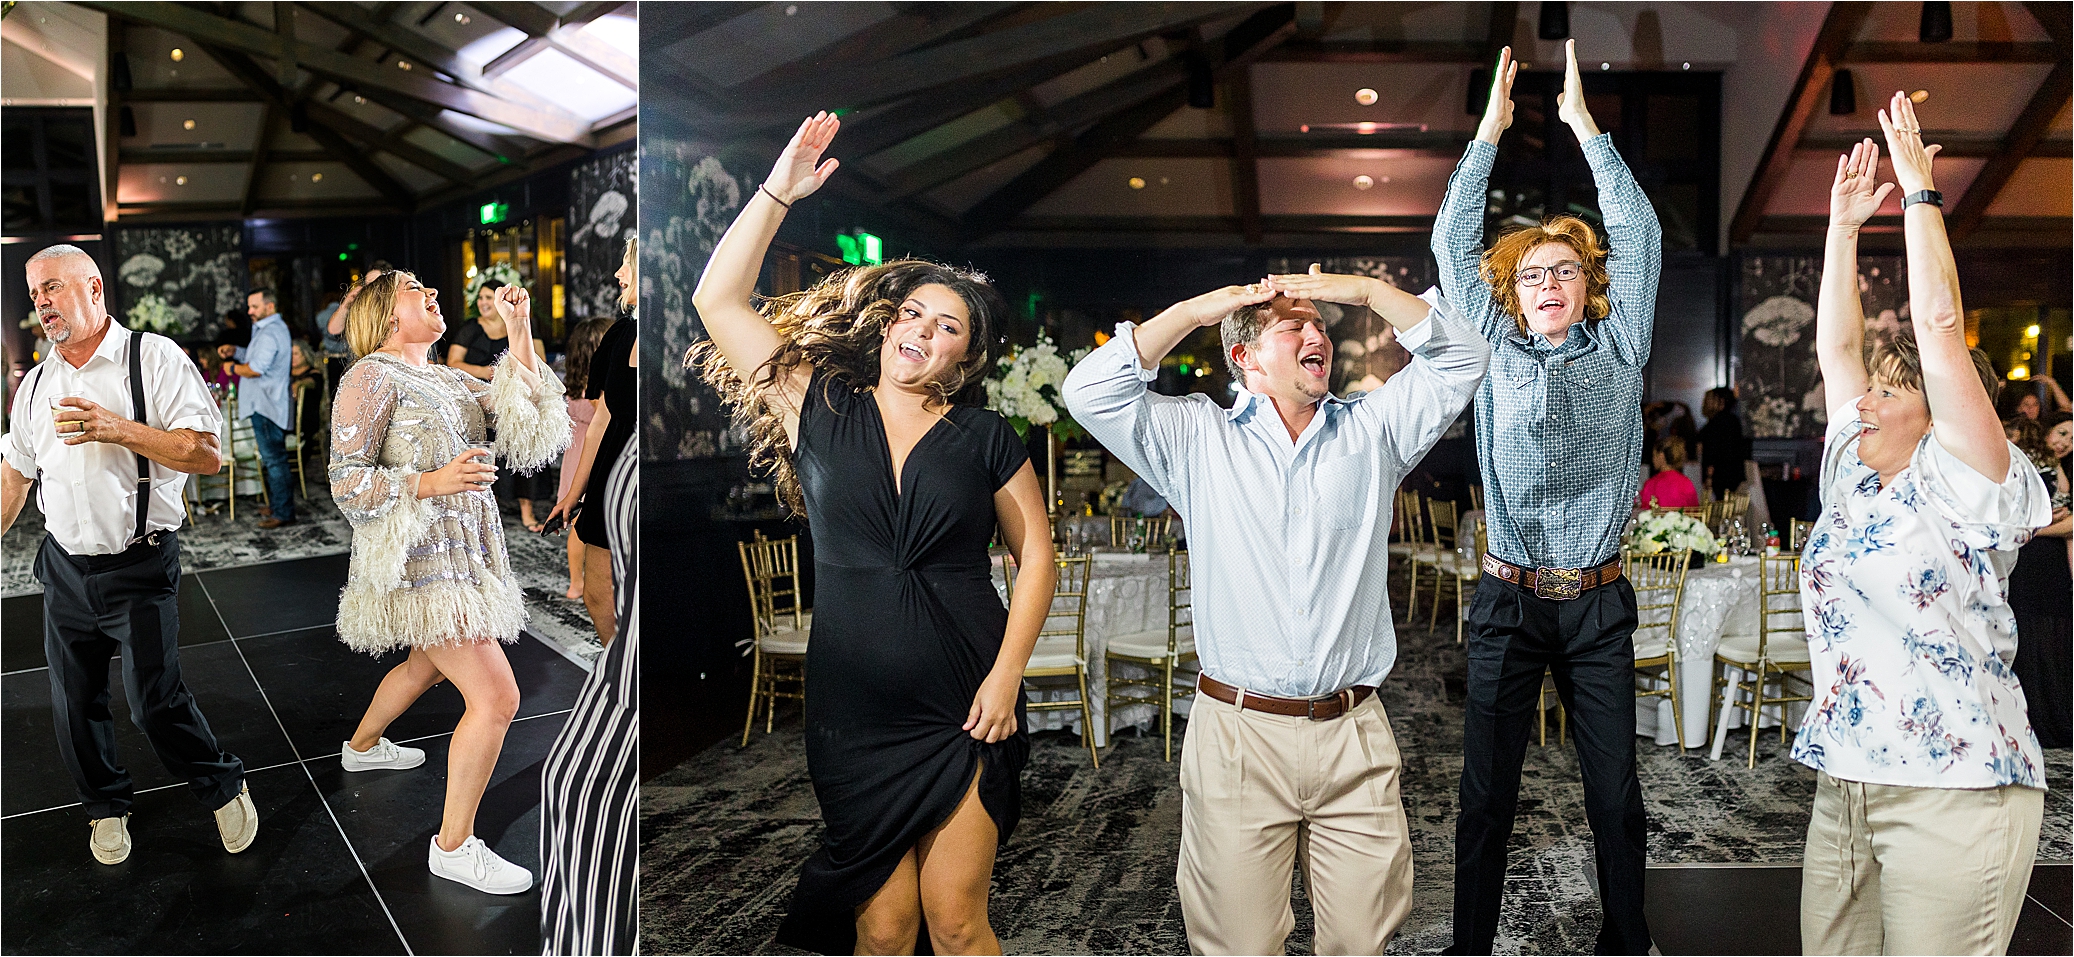 Dancing and singing during a wedding reception at The Redberry Estate in San Antonio, Texas 